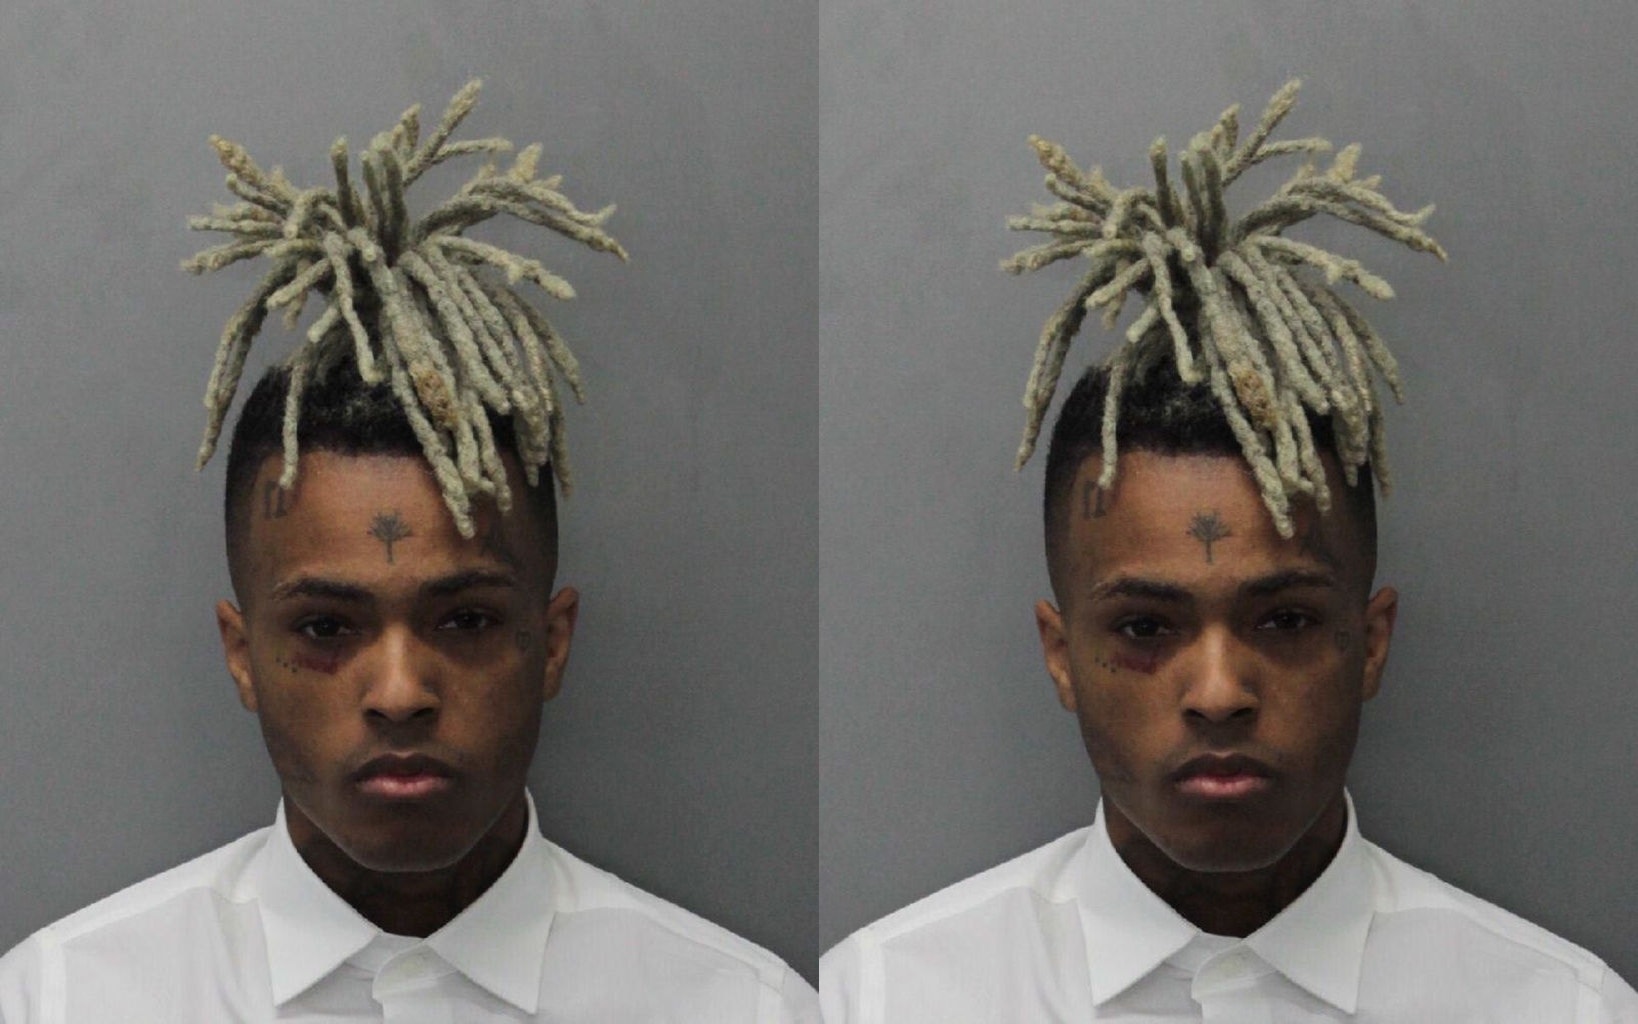 Who Killed XXXTentacion? 5 New Details About Soldier Kidd, The Man Fans Think Murdered Jahseh Dwayne Onfroy